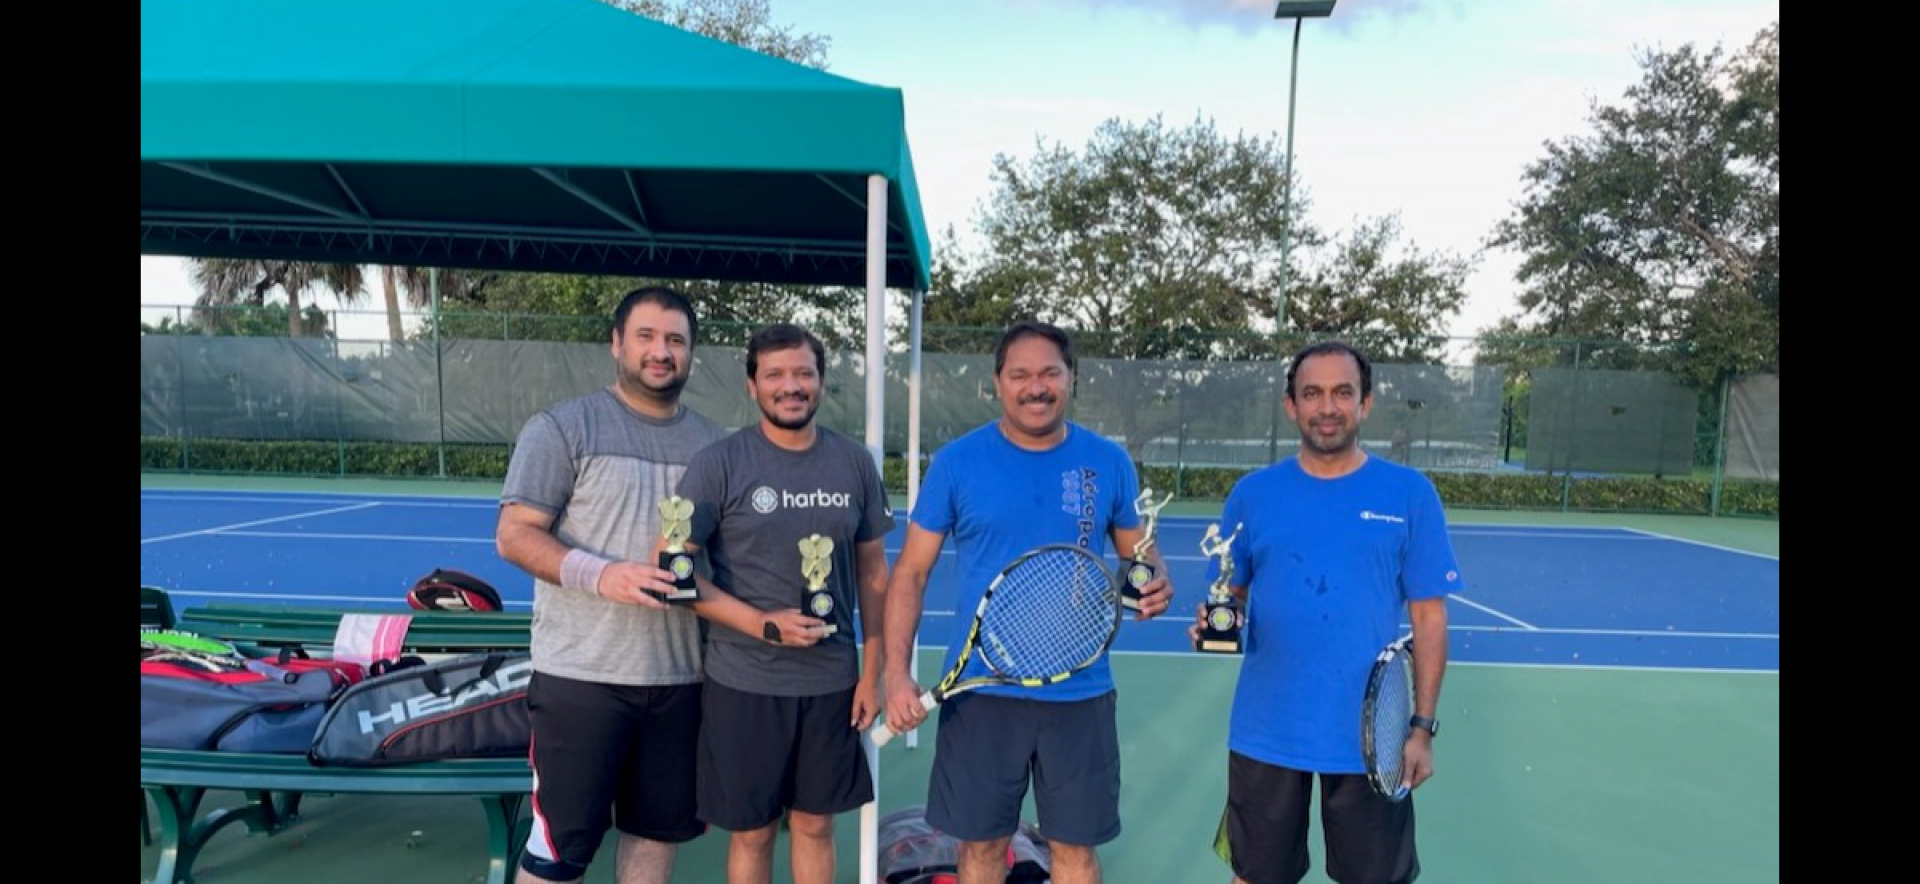 <h2>Doubles 3.5 Finalists!</h2>
<h2>Broward-Summer 2022.</h2>